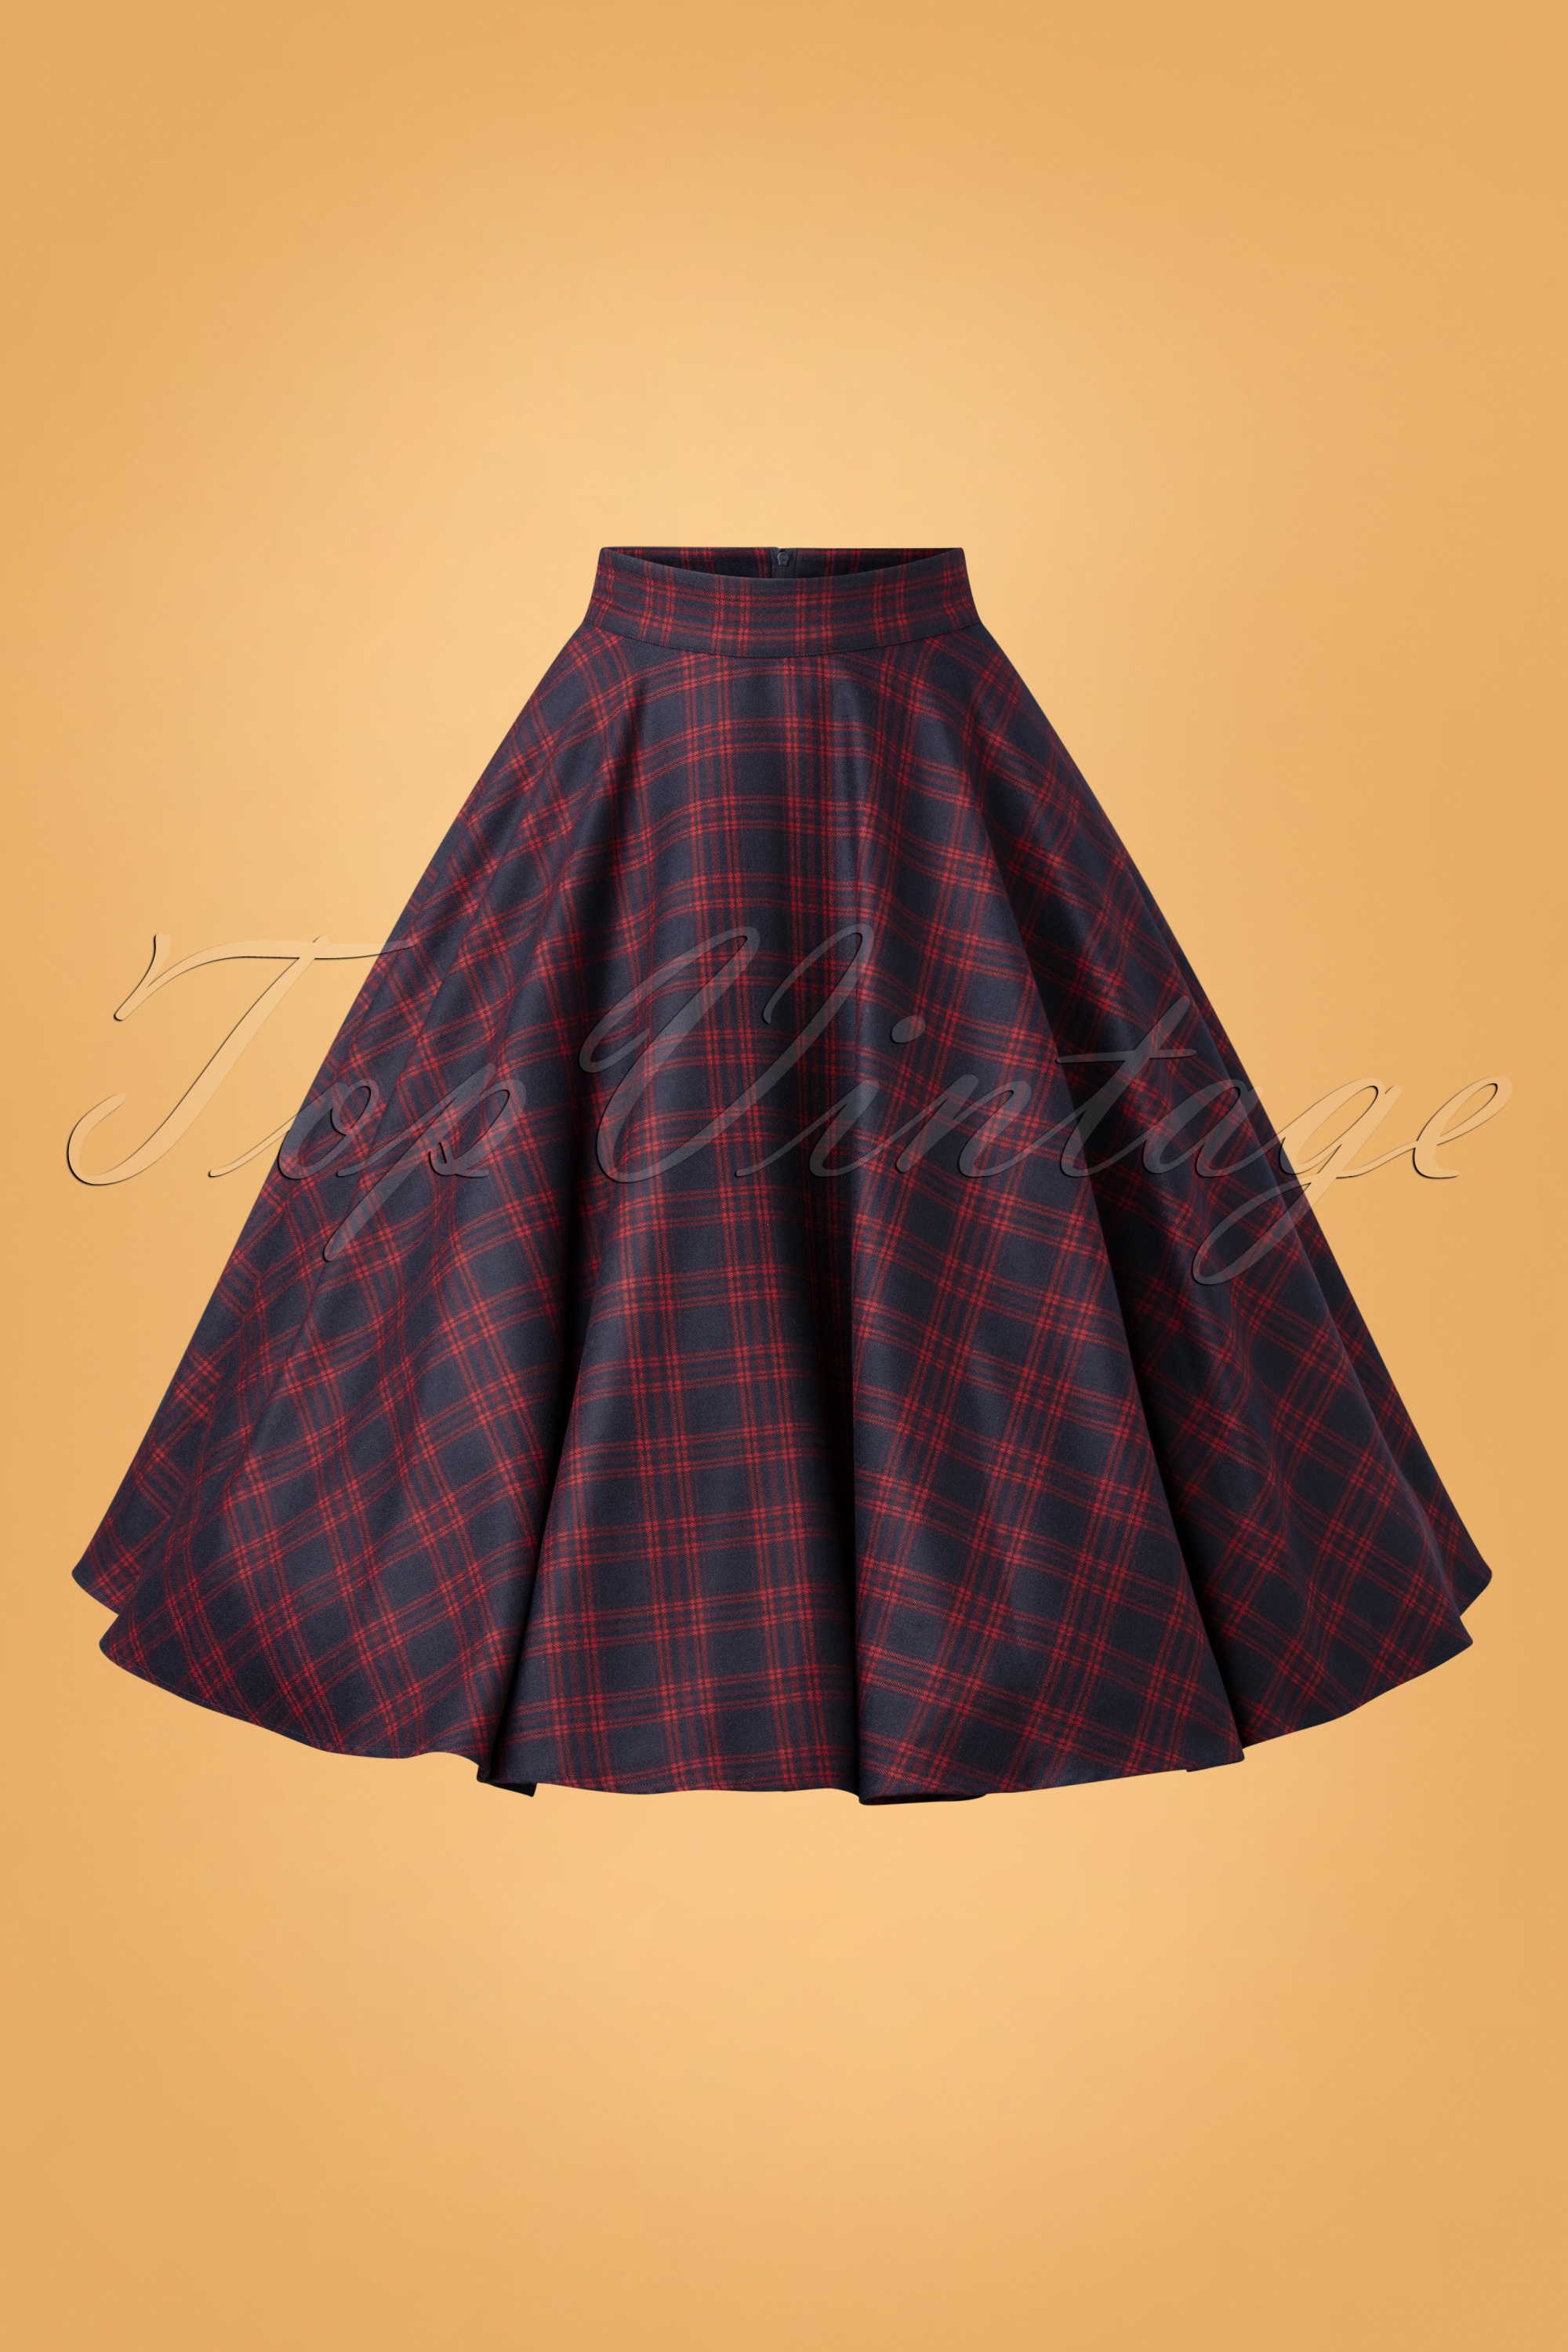 Banned Retro - Adore Her Check swing rok in marineblauw en rood 3